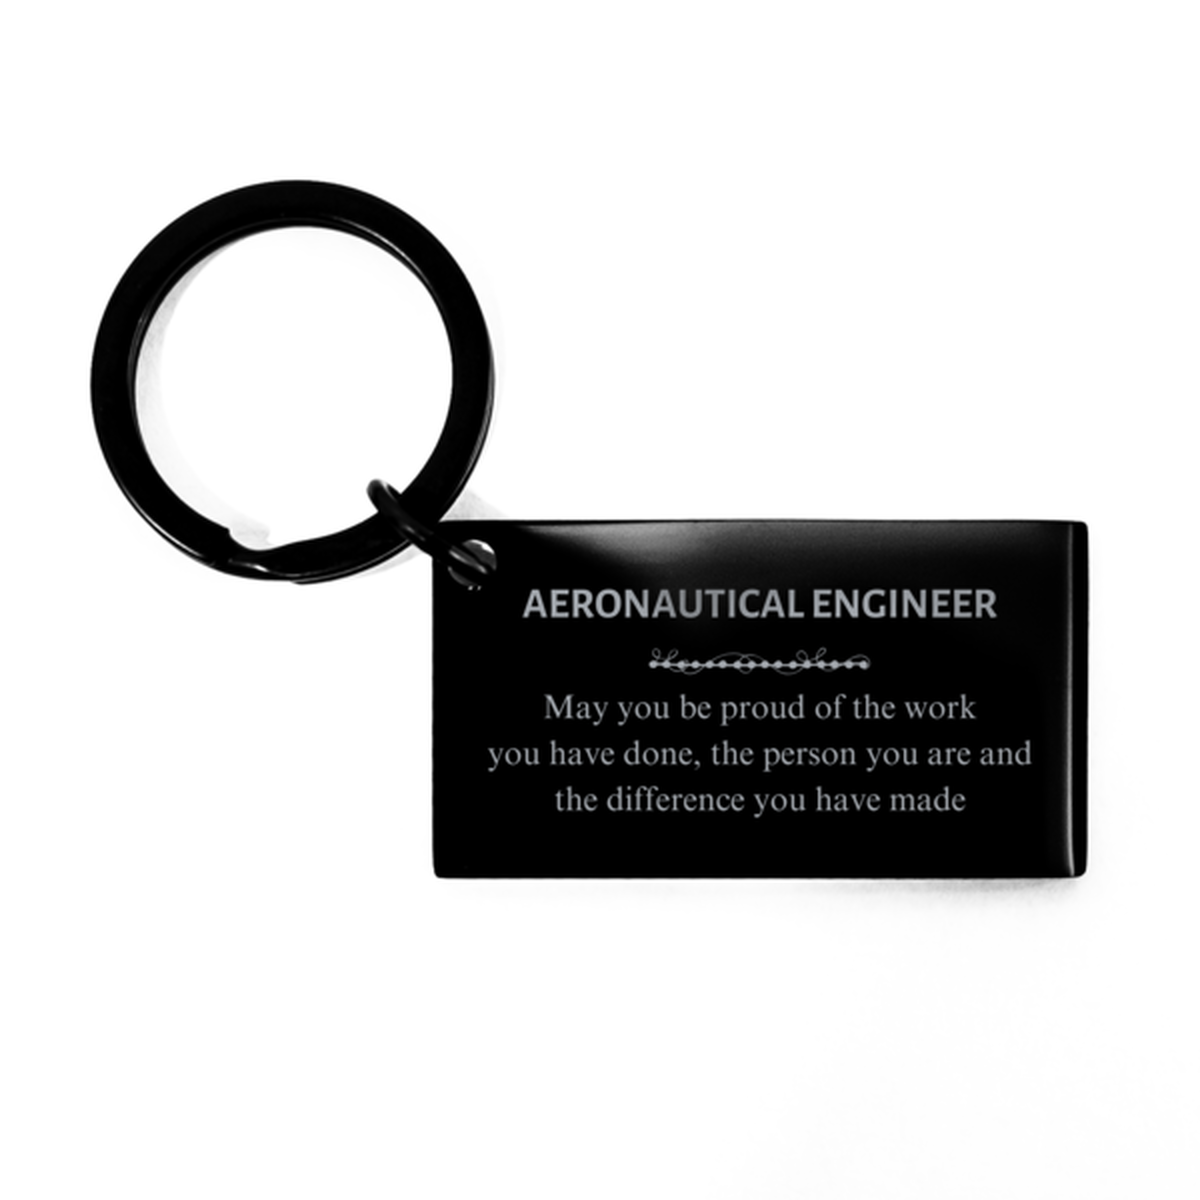 Case Manager May you be proud of the work you have done, Retirement Aeronautical Engineer Keychain for Colleague Appreciation Gifts Amazing for Aeronautical Engineer